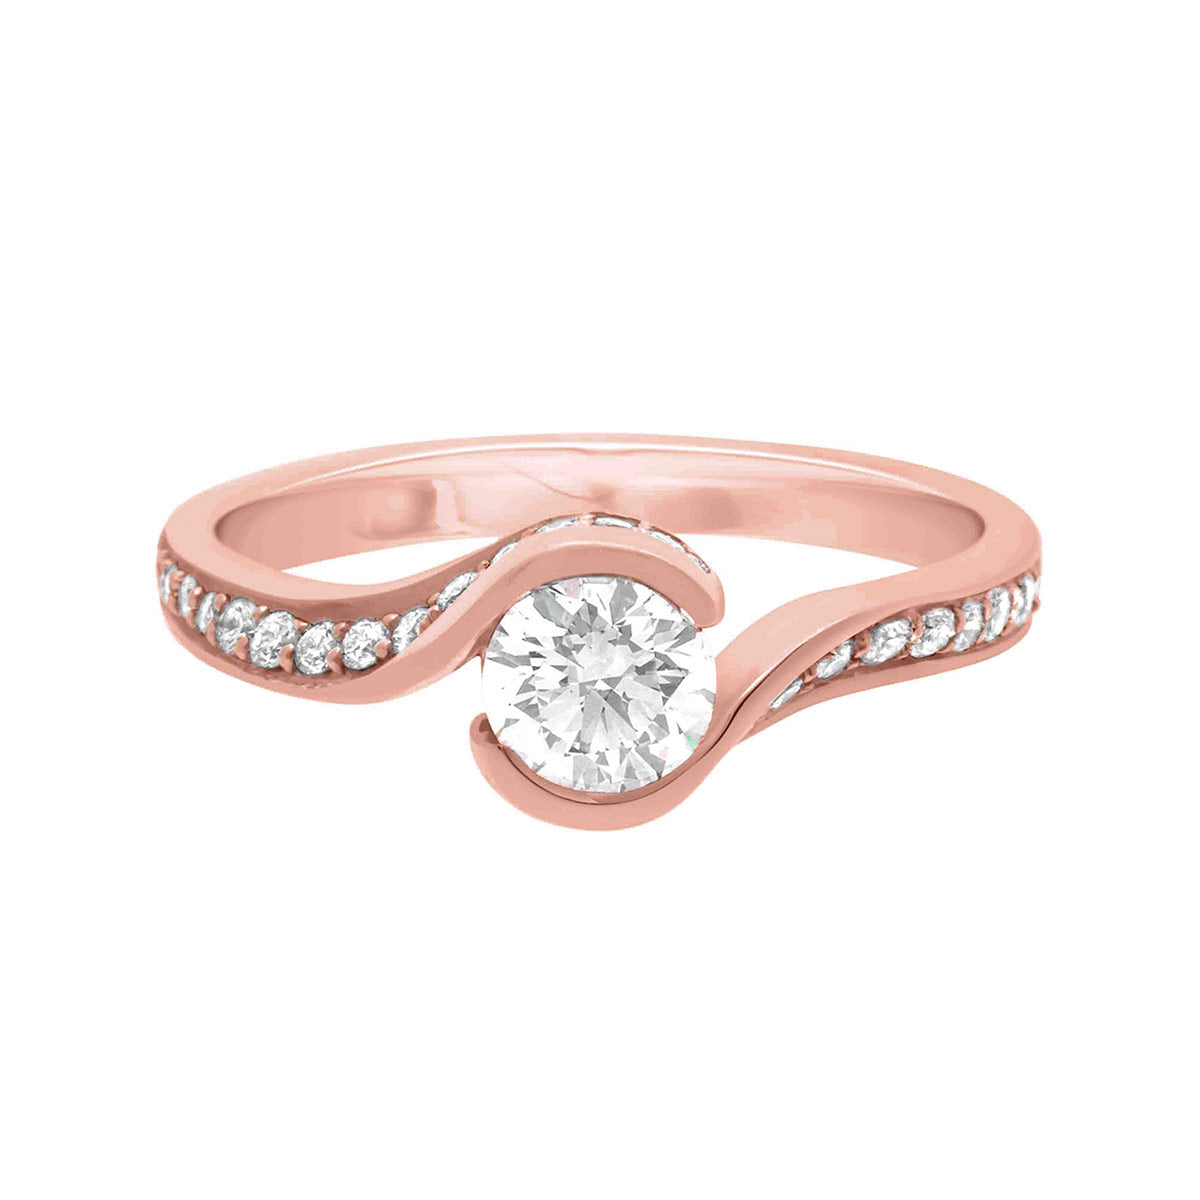 Halo Twist Engagement Ring IN ROSE GOLD